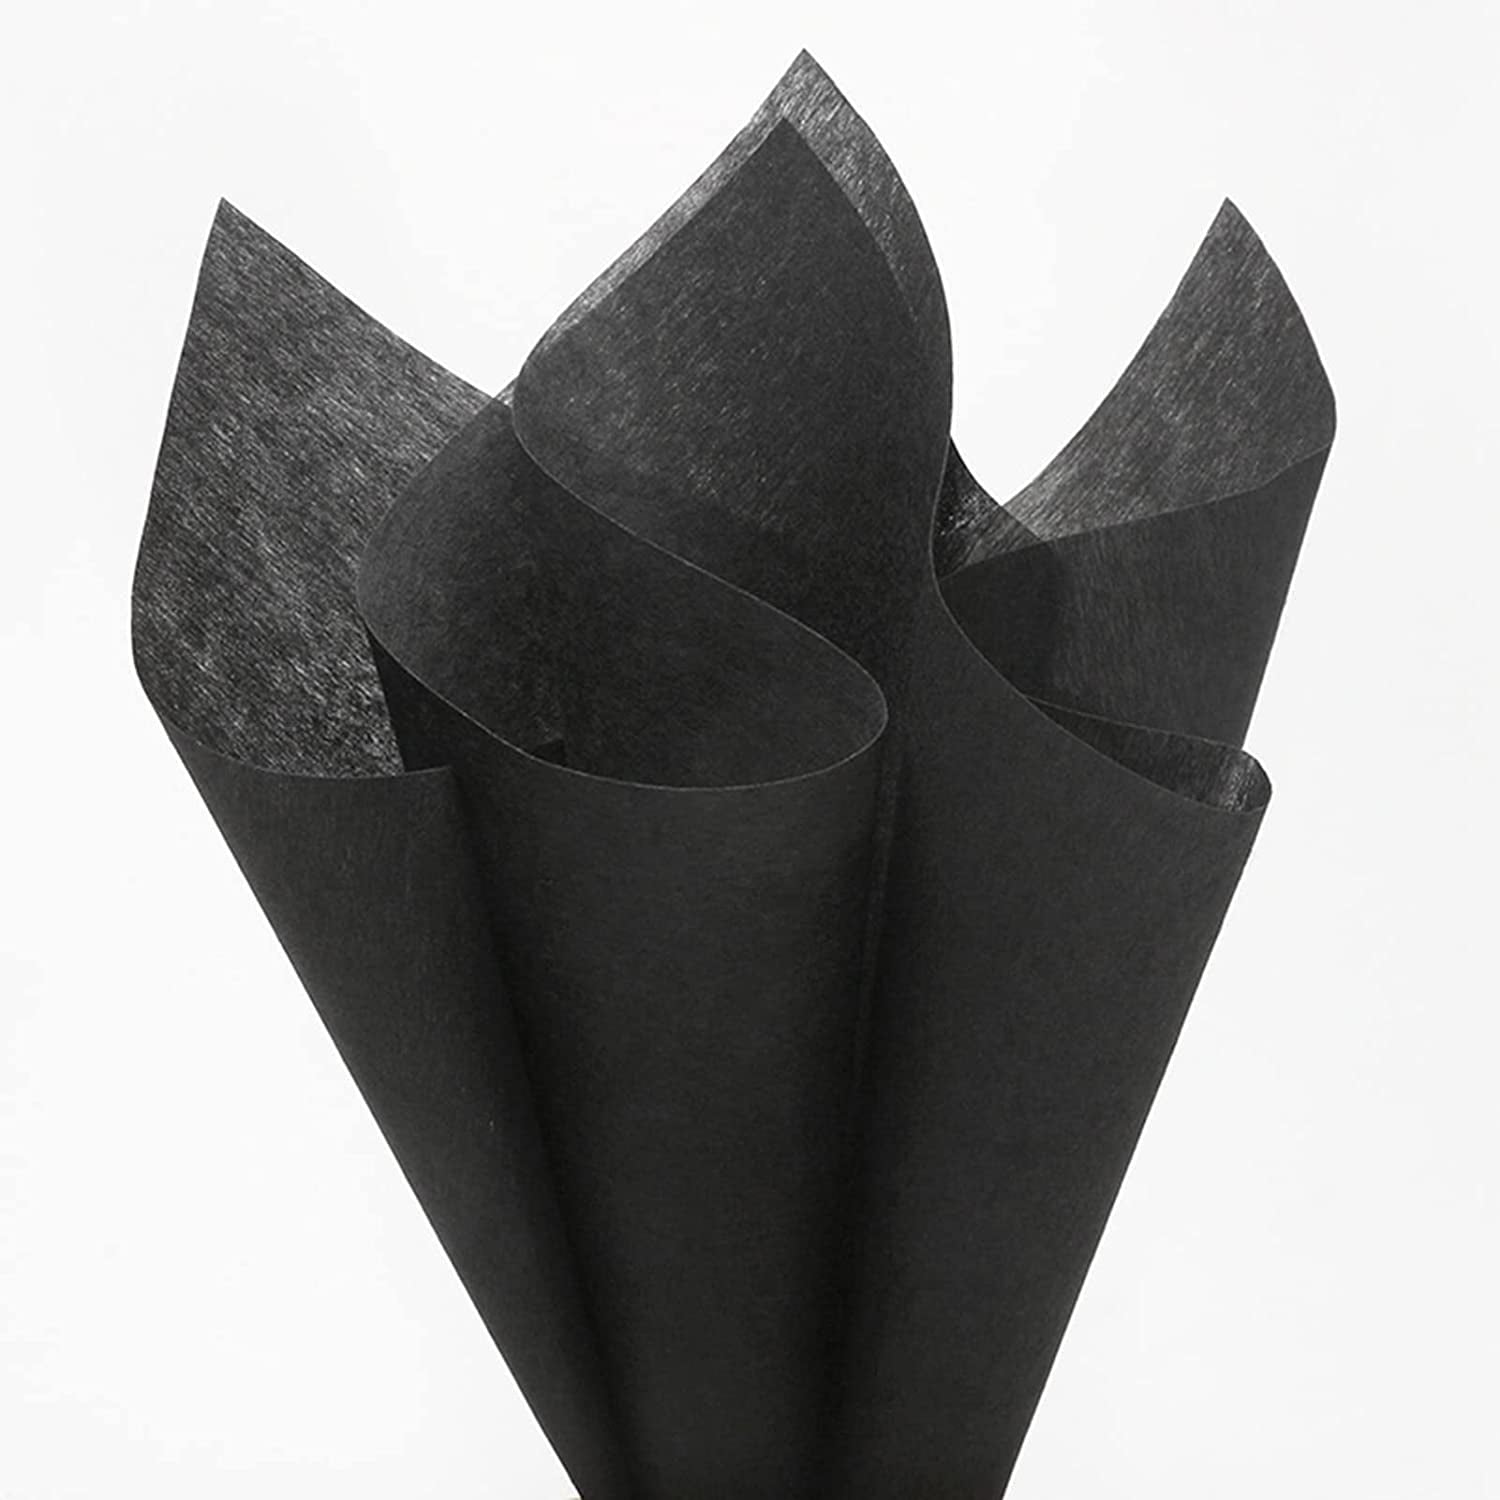 1.34 – Black Waterproof (Thin) – Korean Style Wrapping Paper